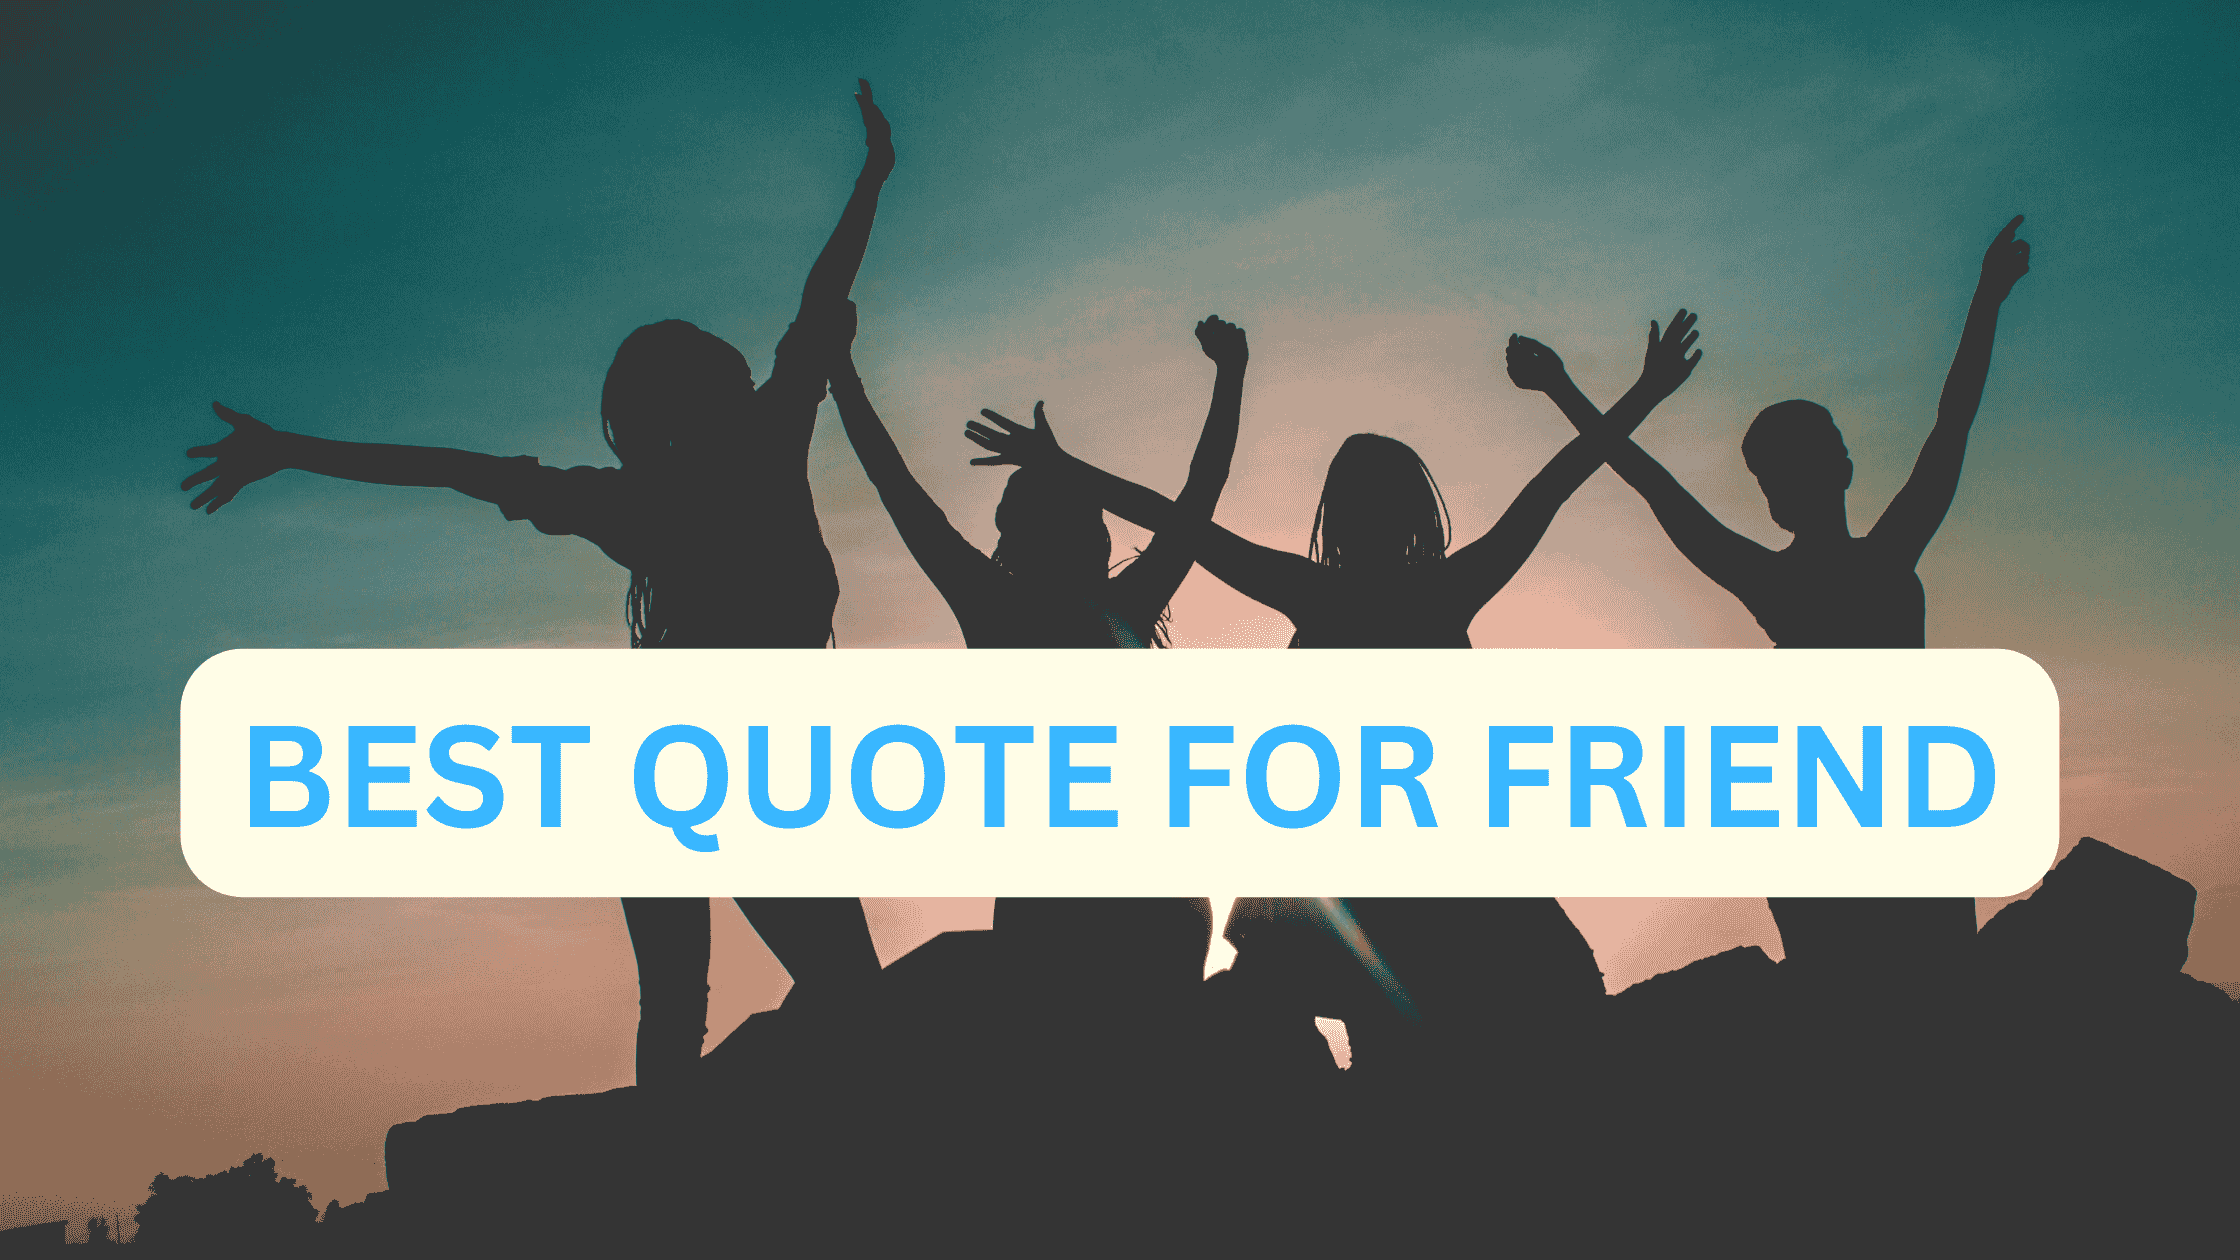 Best Quote for Friend